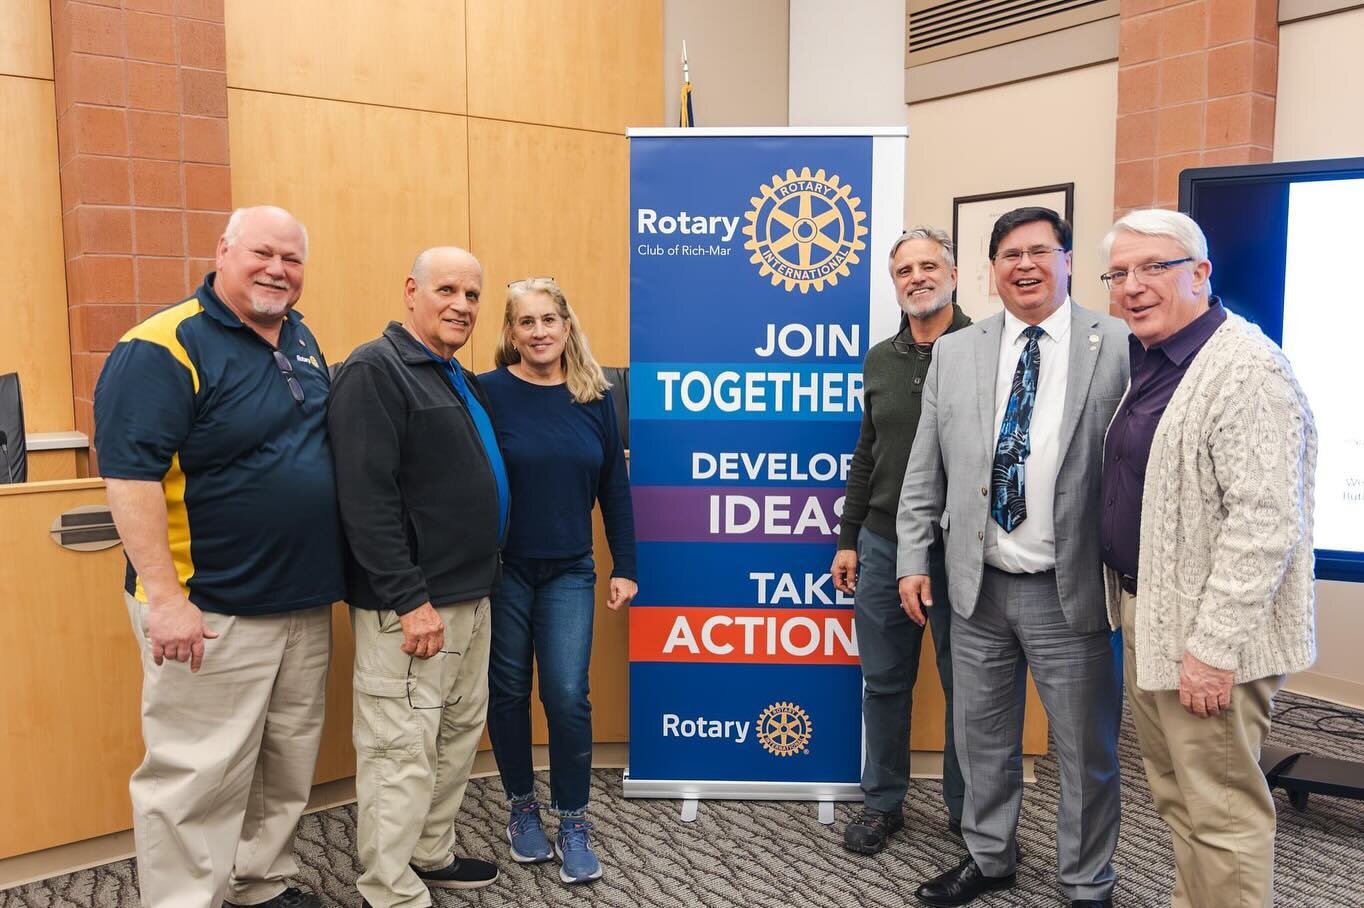 Thanks to all who attended our January mixer co-hosted with Rich Mar Rotary. We had an opportunity to network as well as learn about the benefits of both local organizations. We indulged in refreshments by Stick City Brewing Company and John Marshall